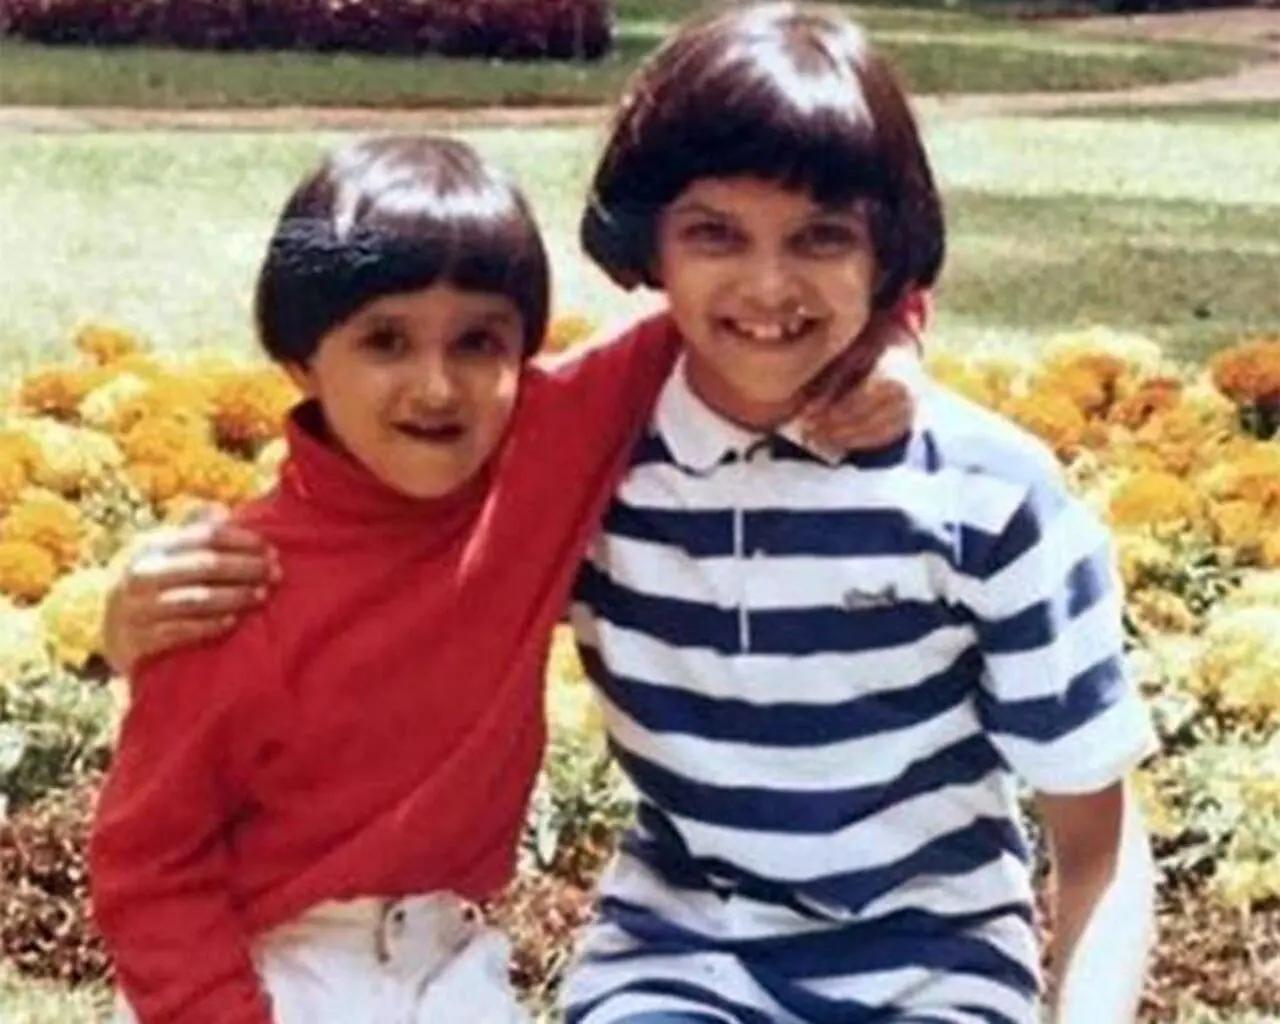 Deepika Padukone as a child. She looks adorable with a bowl cut set against a flower field.